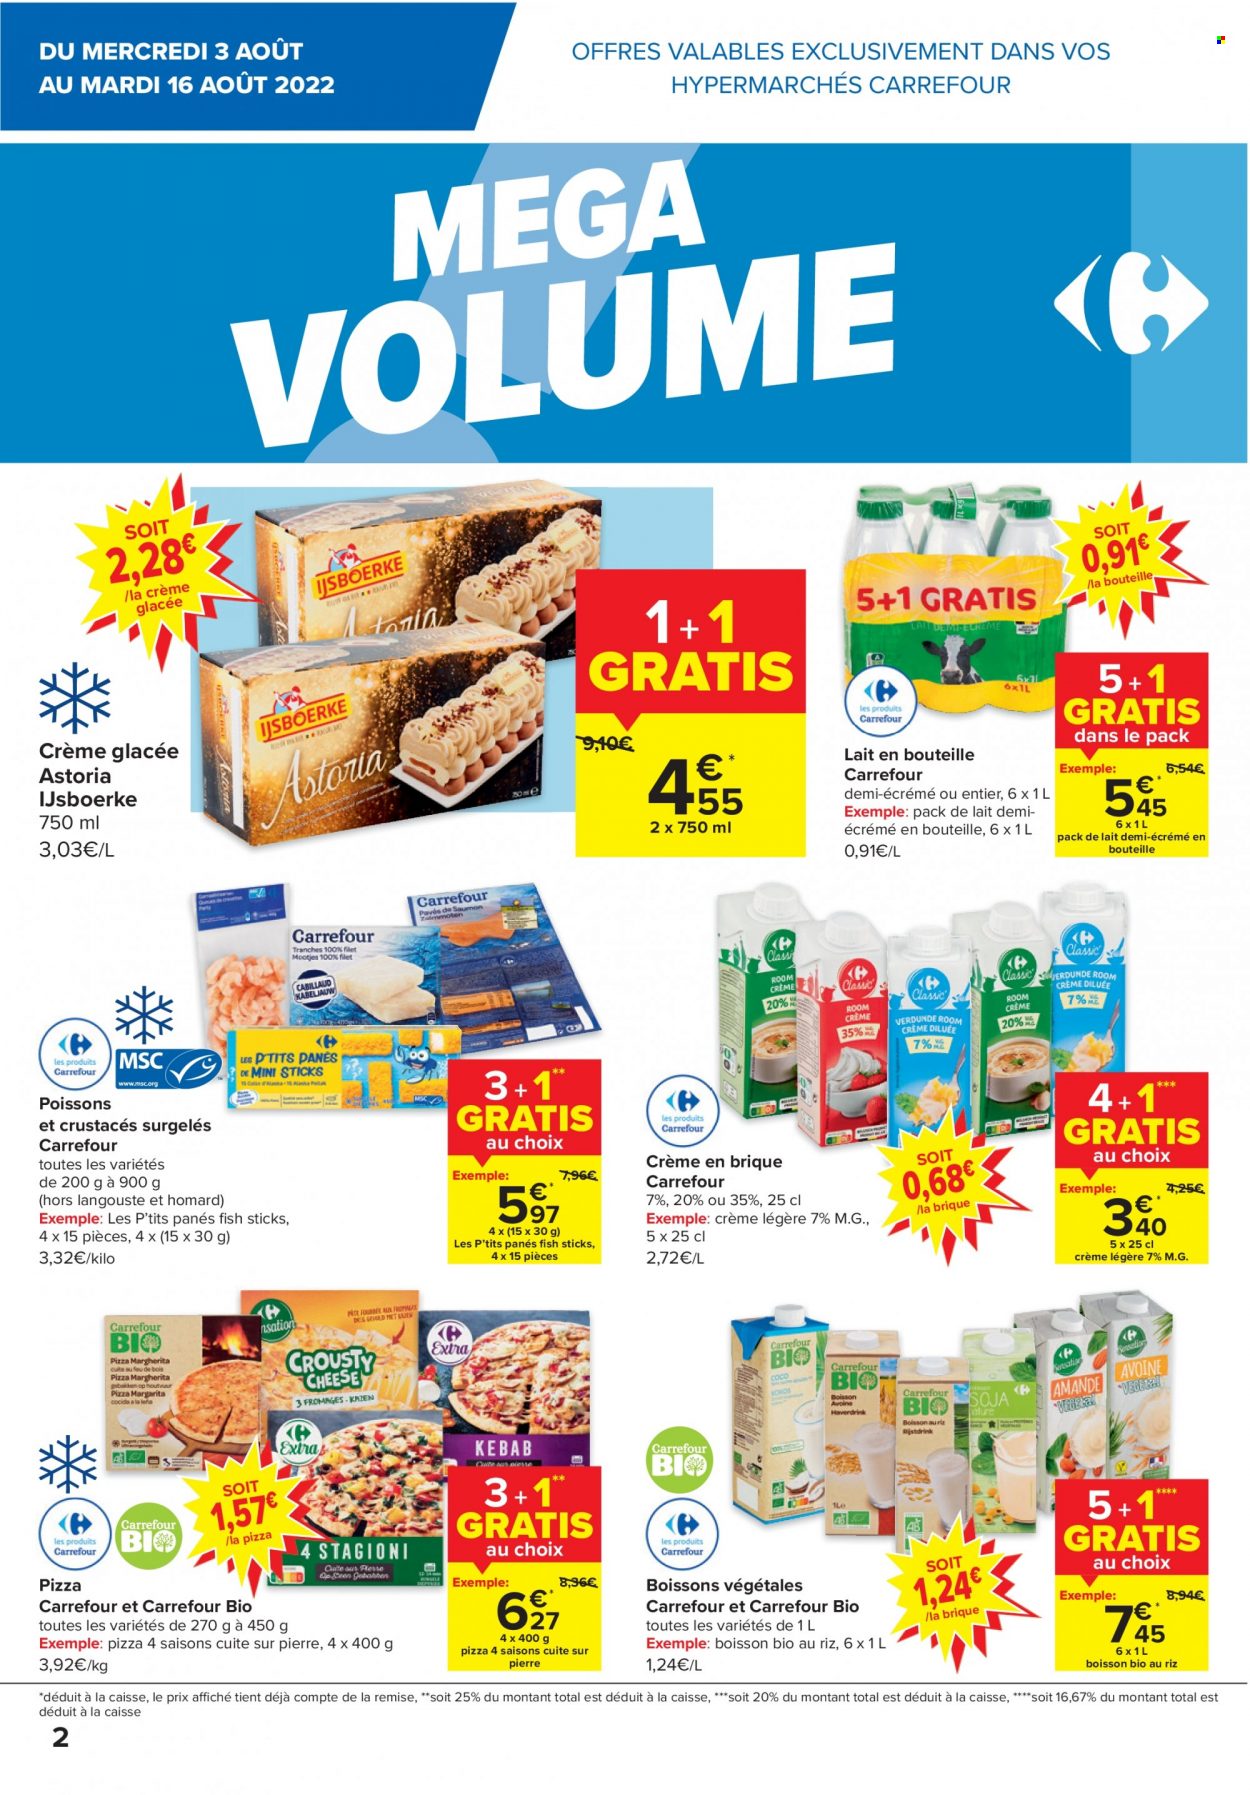 Catalogue Carrefour hypermarkt - 3.8.2022 - 16.8.2022. Page 2.